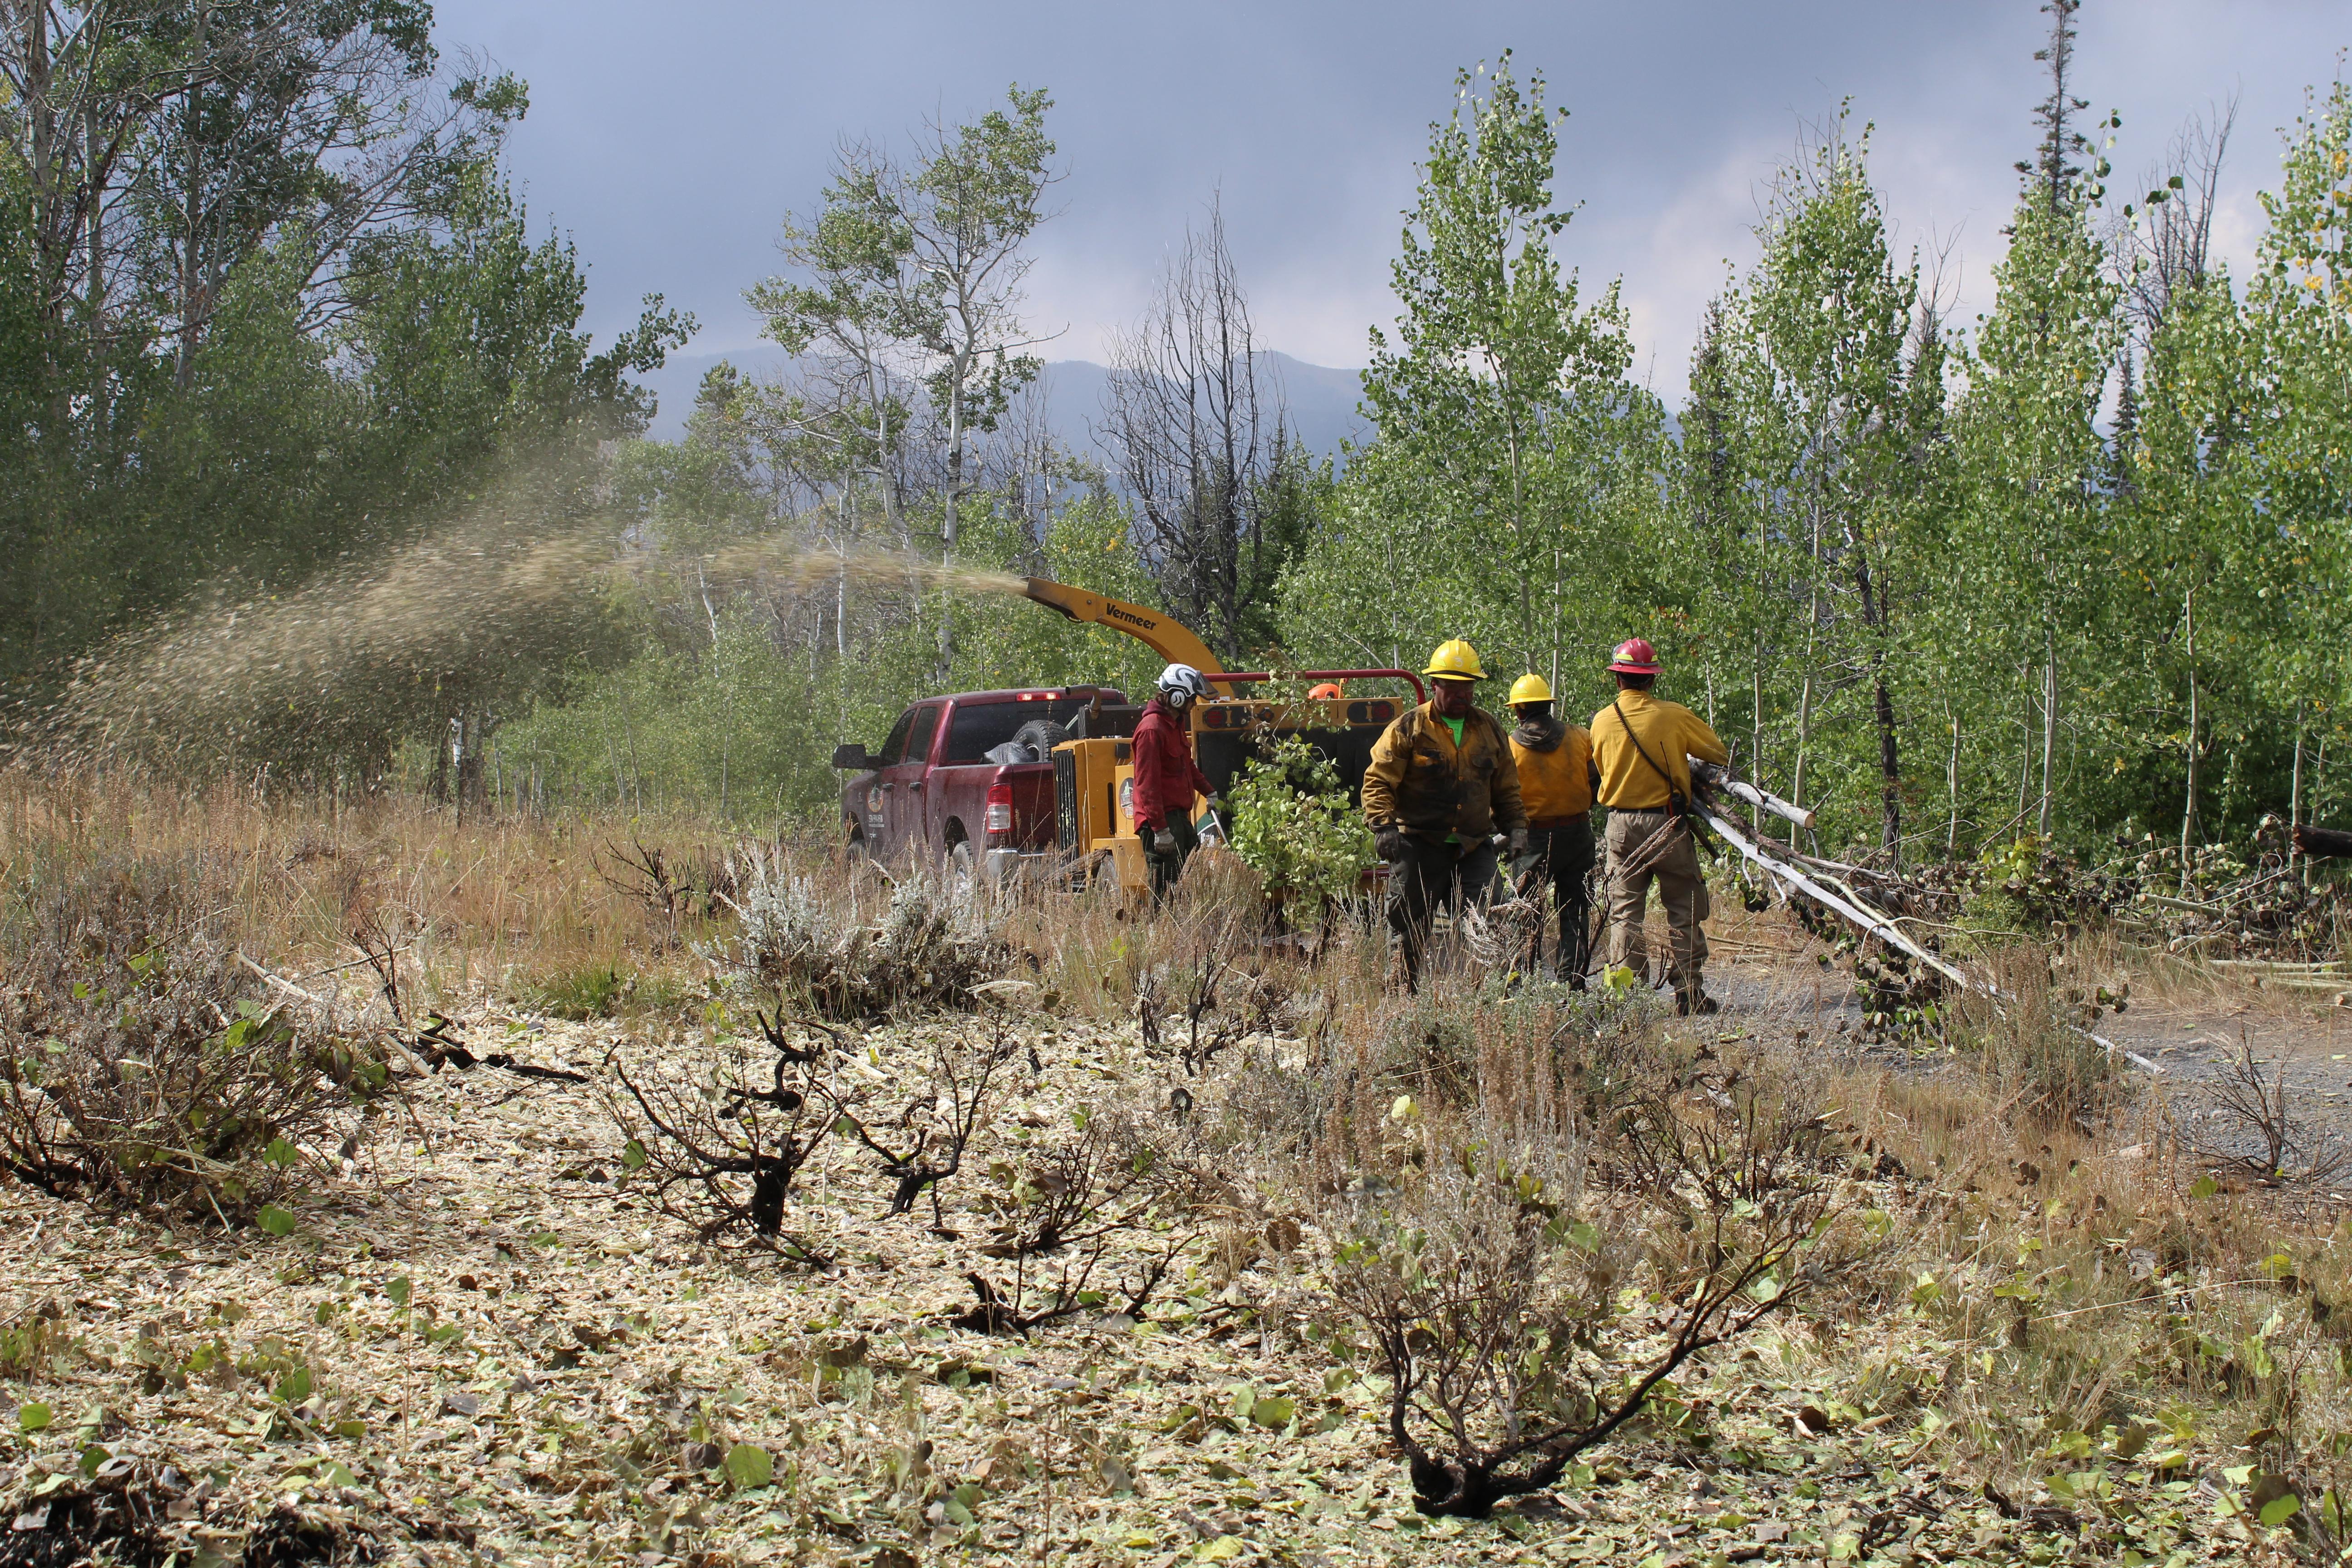 chipping crew works on east side of fire